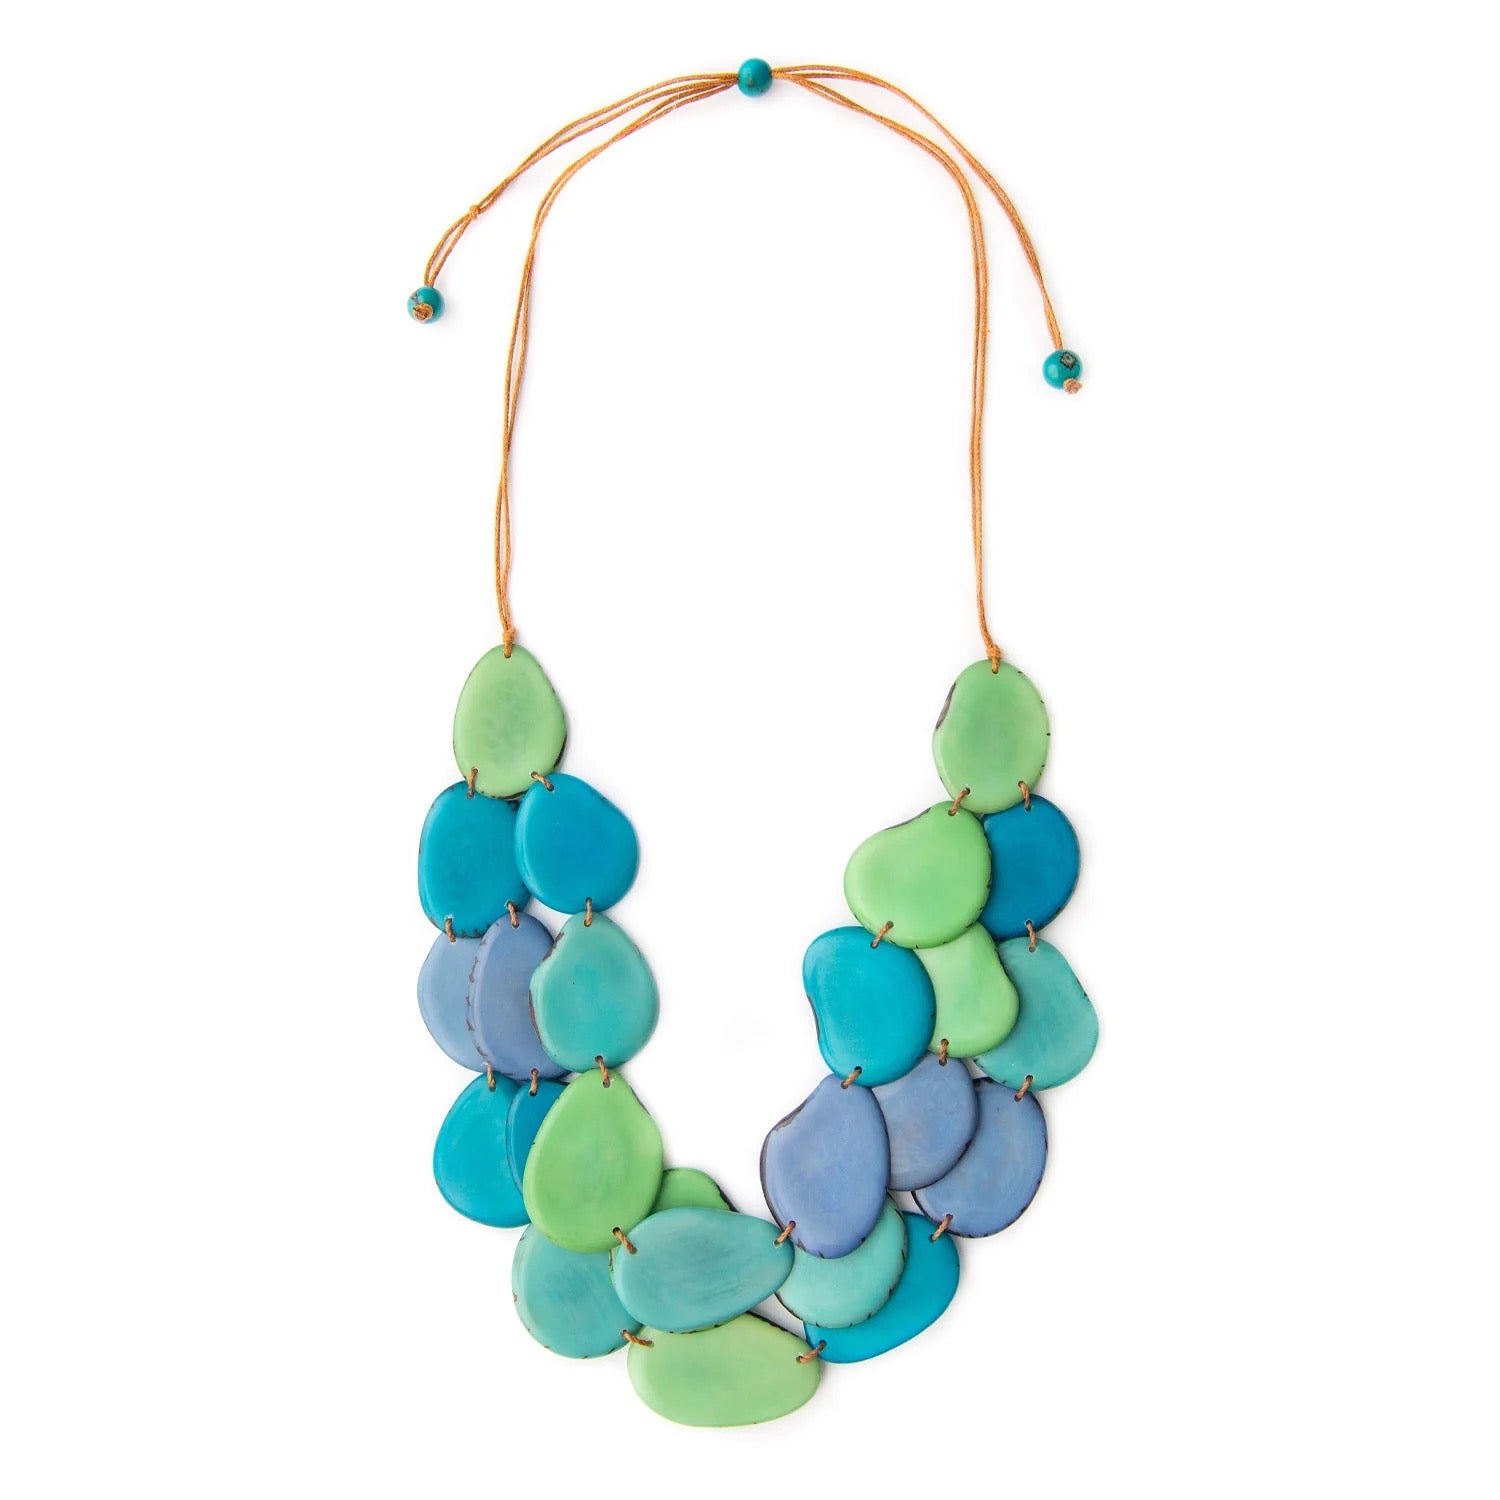 Tagua Jewelry "Amigas" Necklace in Biscayne Bay, Turquoise, and Mint